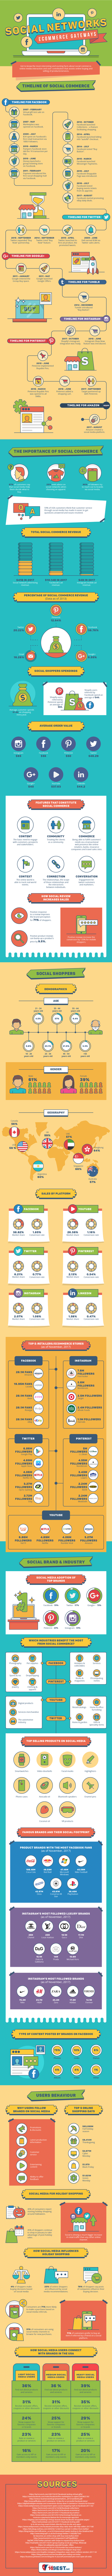 Social Media and Sales – A Match Made in Heaven? [Infographic]